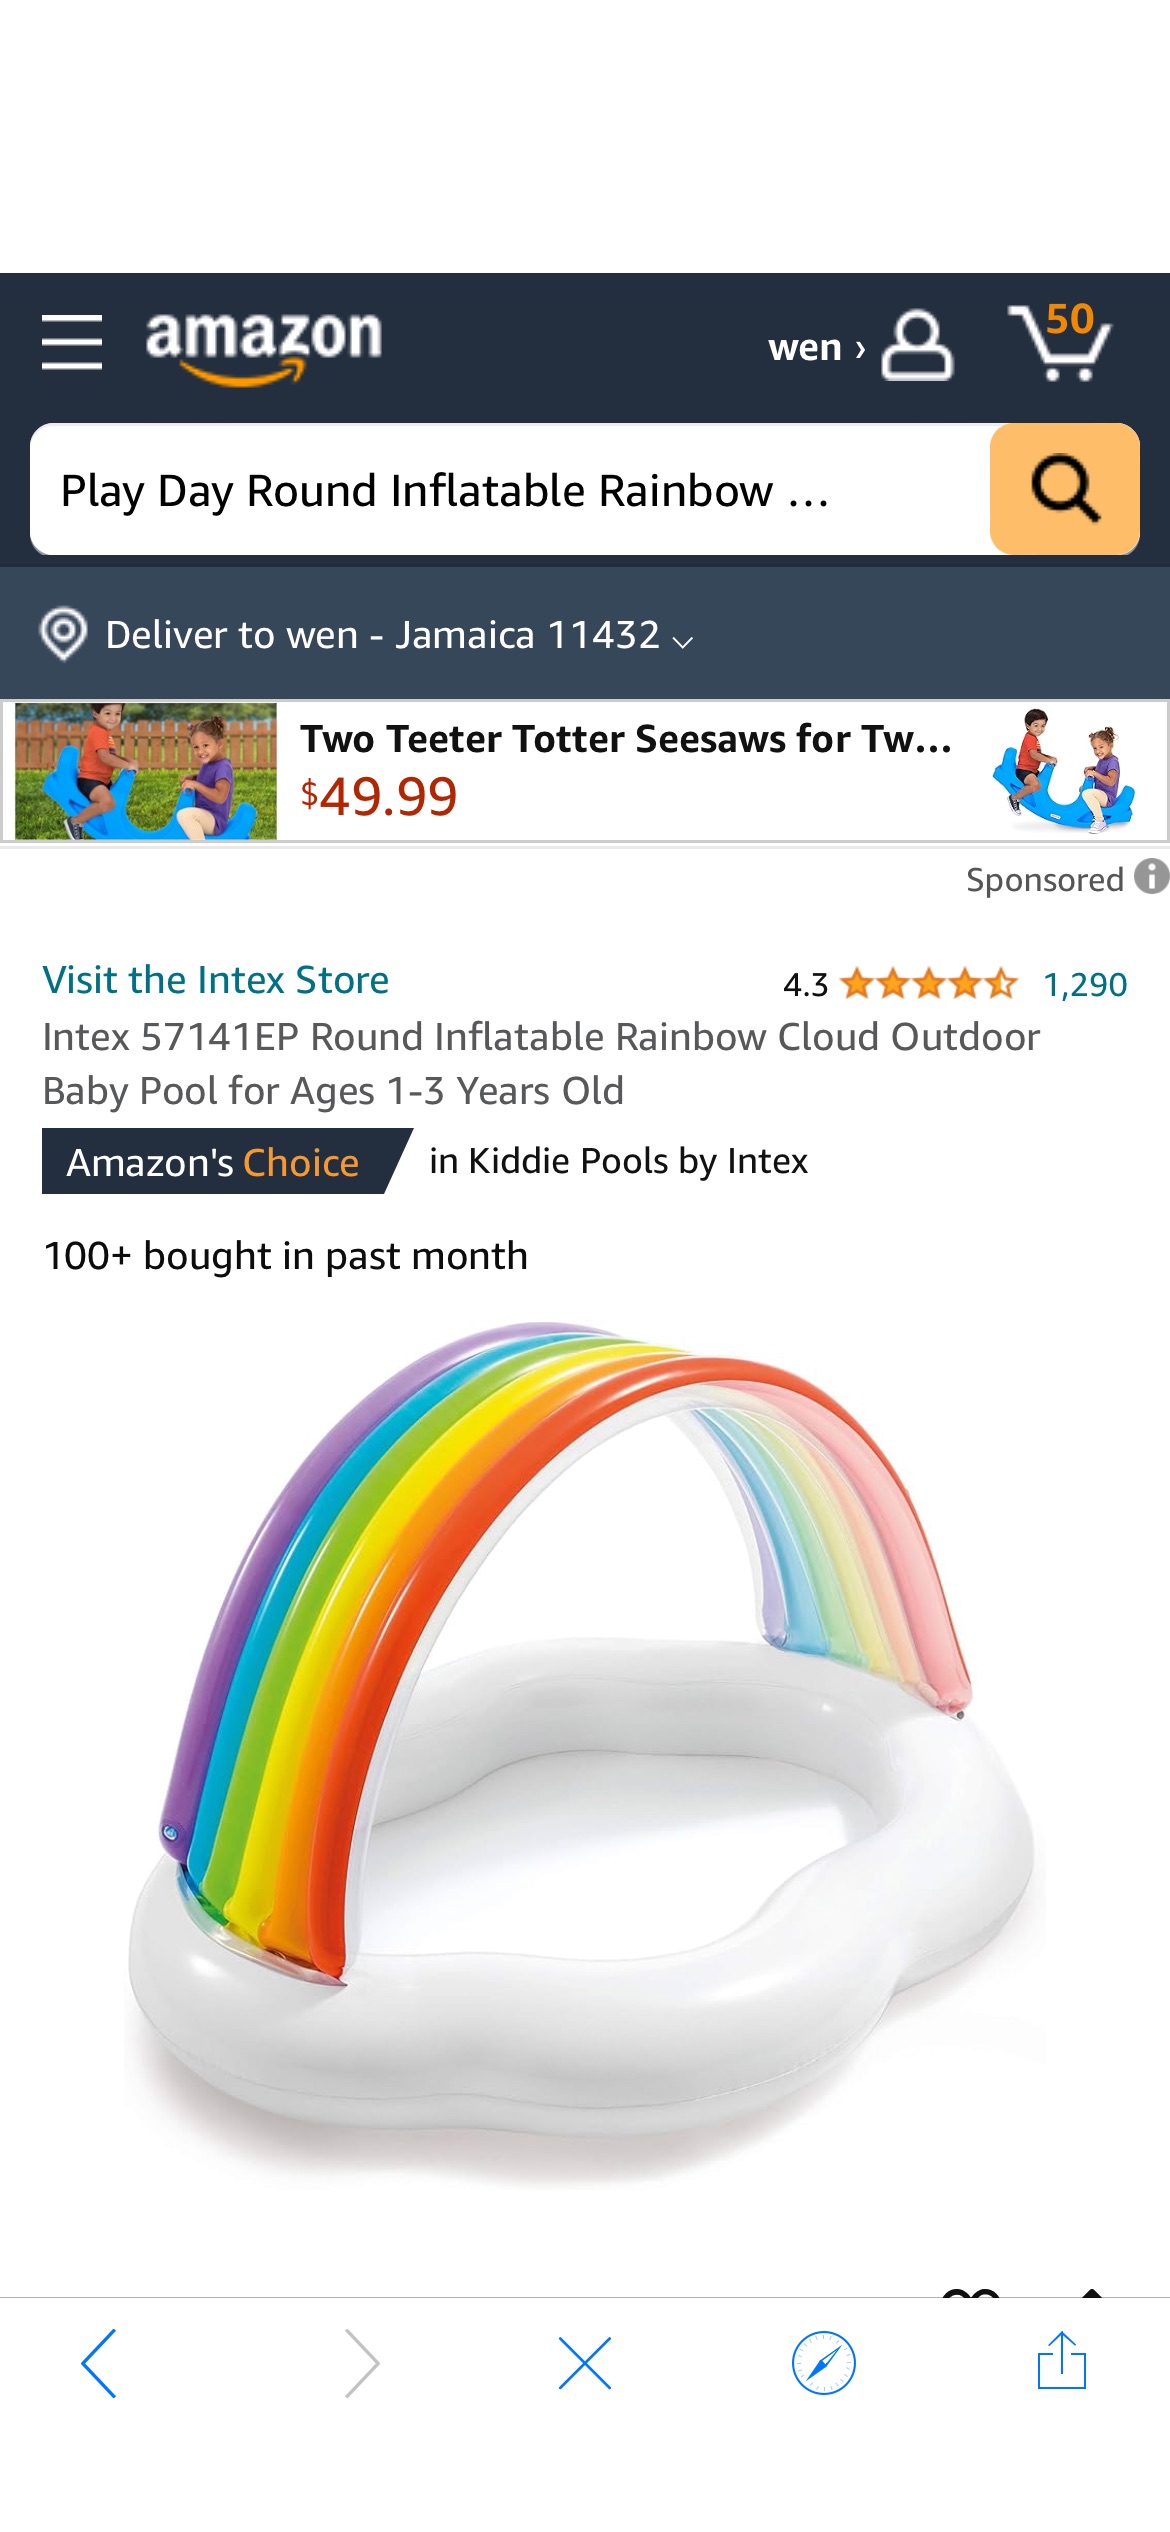 Amazon.com: Intex 57141EP Round Inflatable Rainbow Cloud Outdoor Baby Pool for Ages 1-3 Years Old : Toys & Games